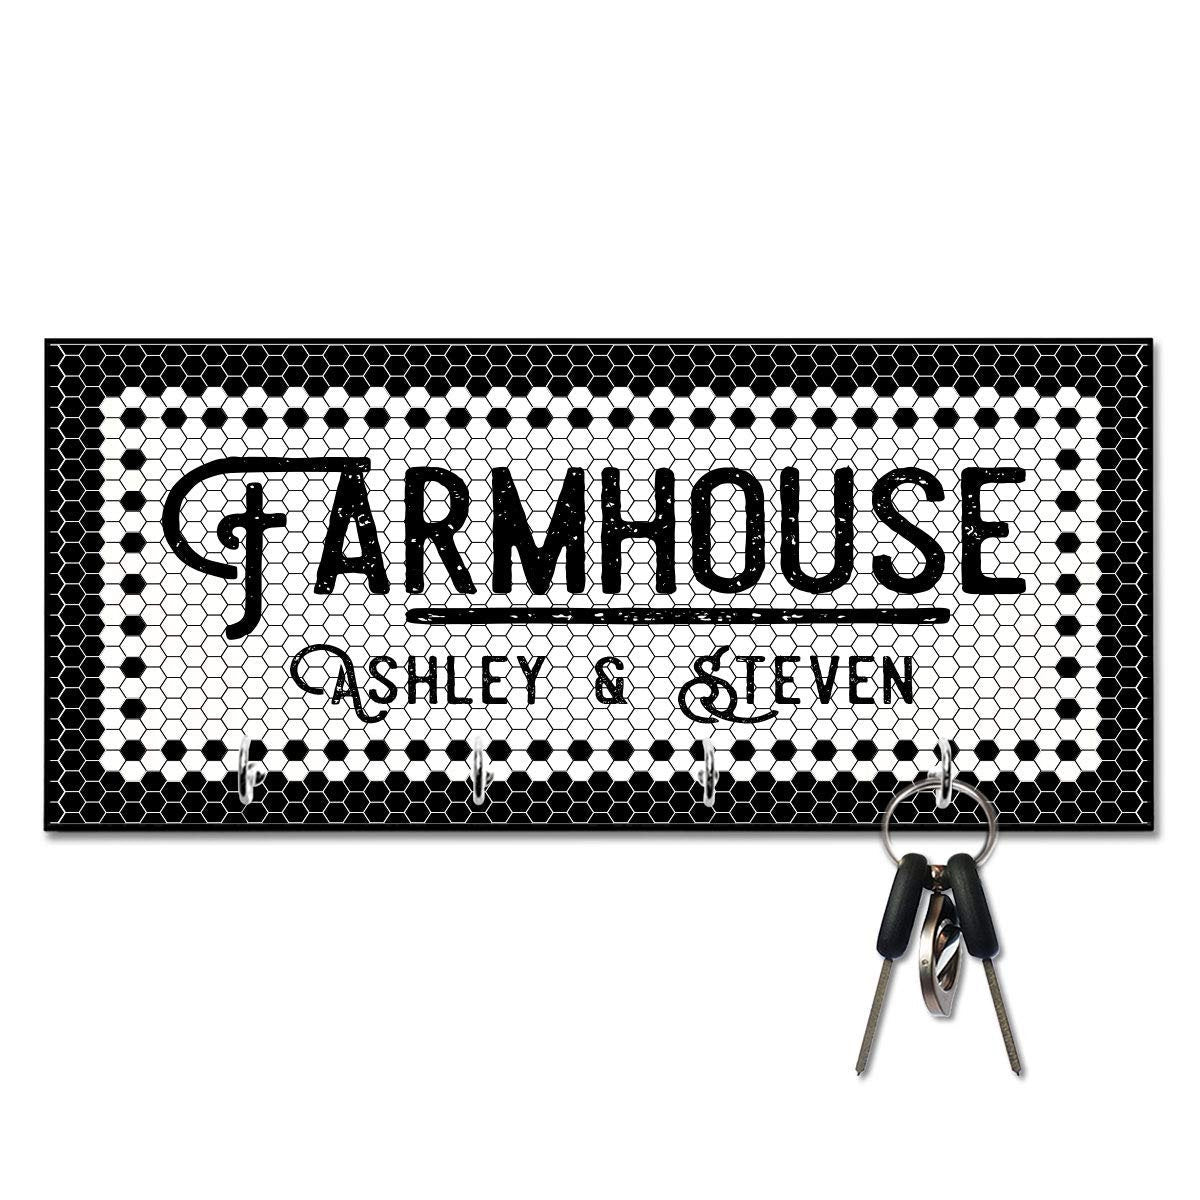 Personallized Black and White Tile Look Look Farm House Key Hanger